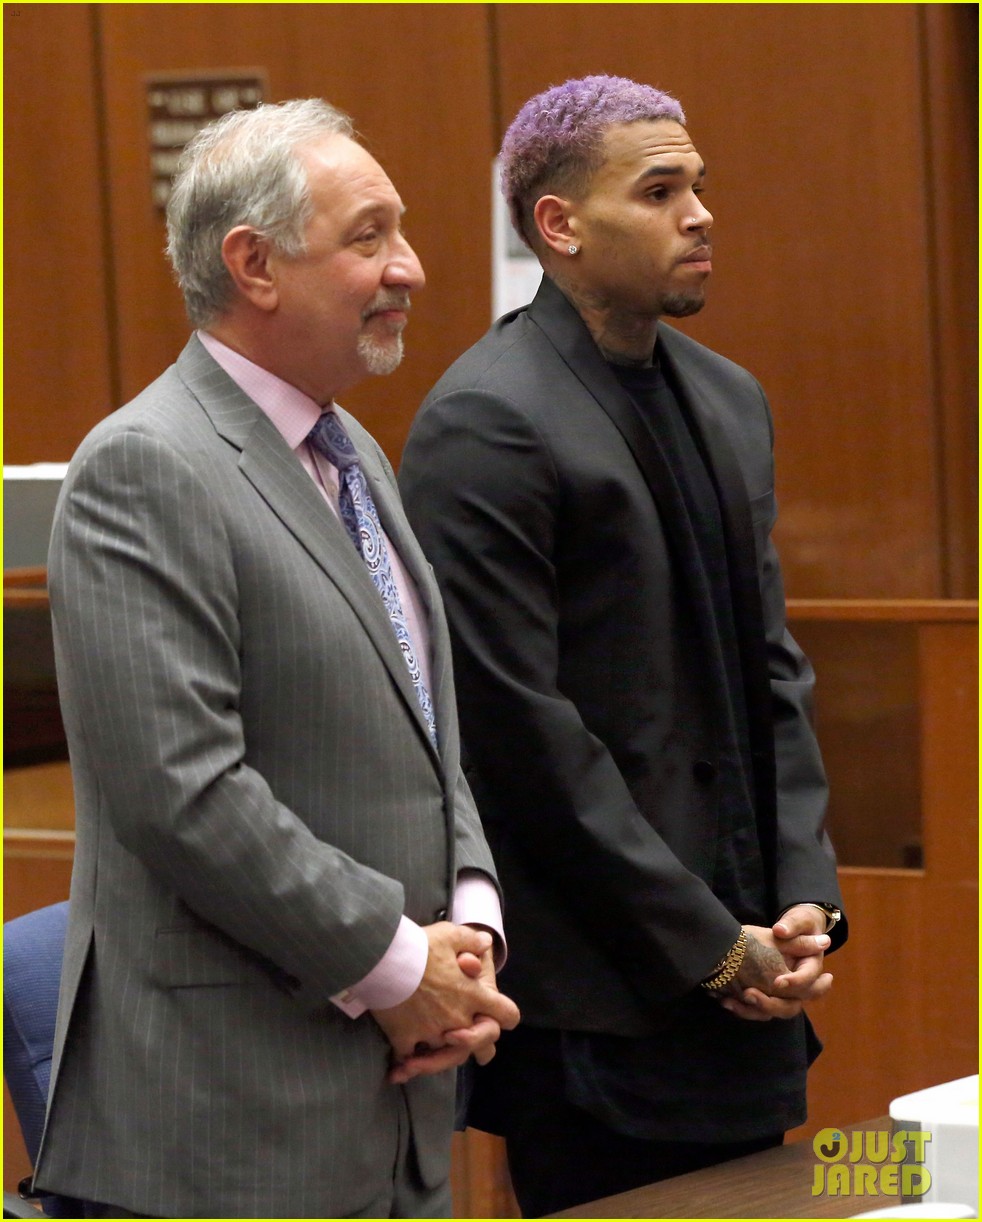 Chris Brown Sports Purple Hair For Probation Ending Court Appearance: Photo  3330705 | Chris Brown Pictures | Just Jared